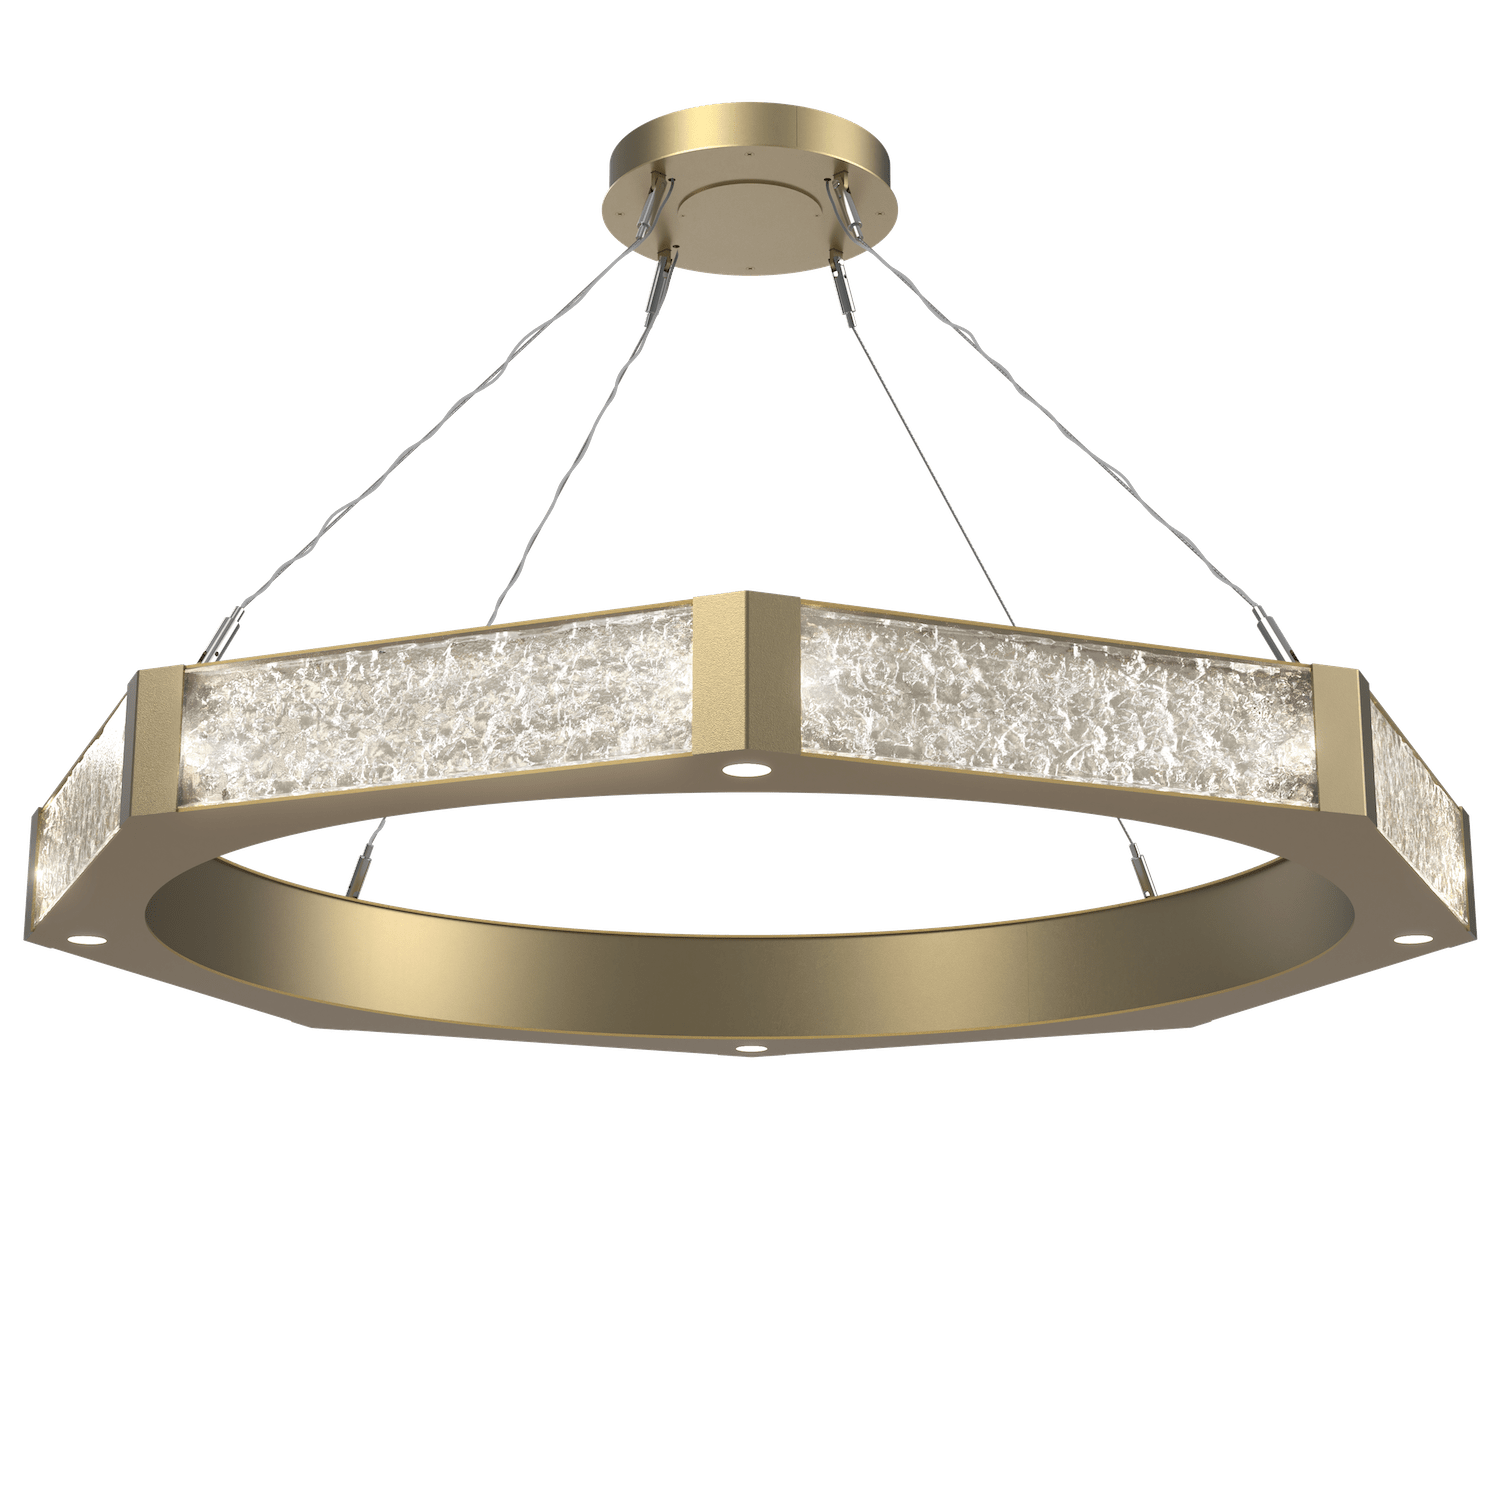 CHB0061-48-GB-GC-Hammerton-Studio-Glacier-48-inch-ring-chandelier-with-gilded-brass-finish-and-clear-blown-glass-with-geo-clear-cast-glass-diffusers-and-LED-lamping